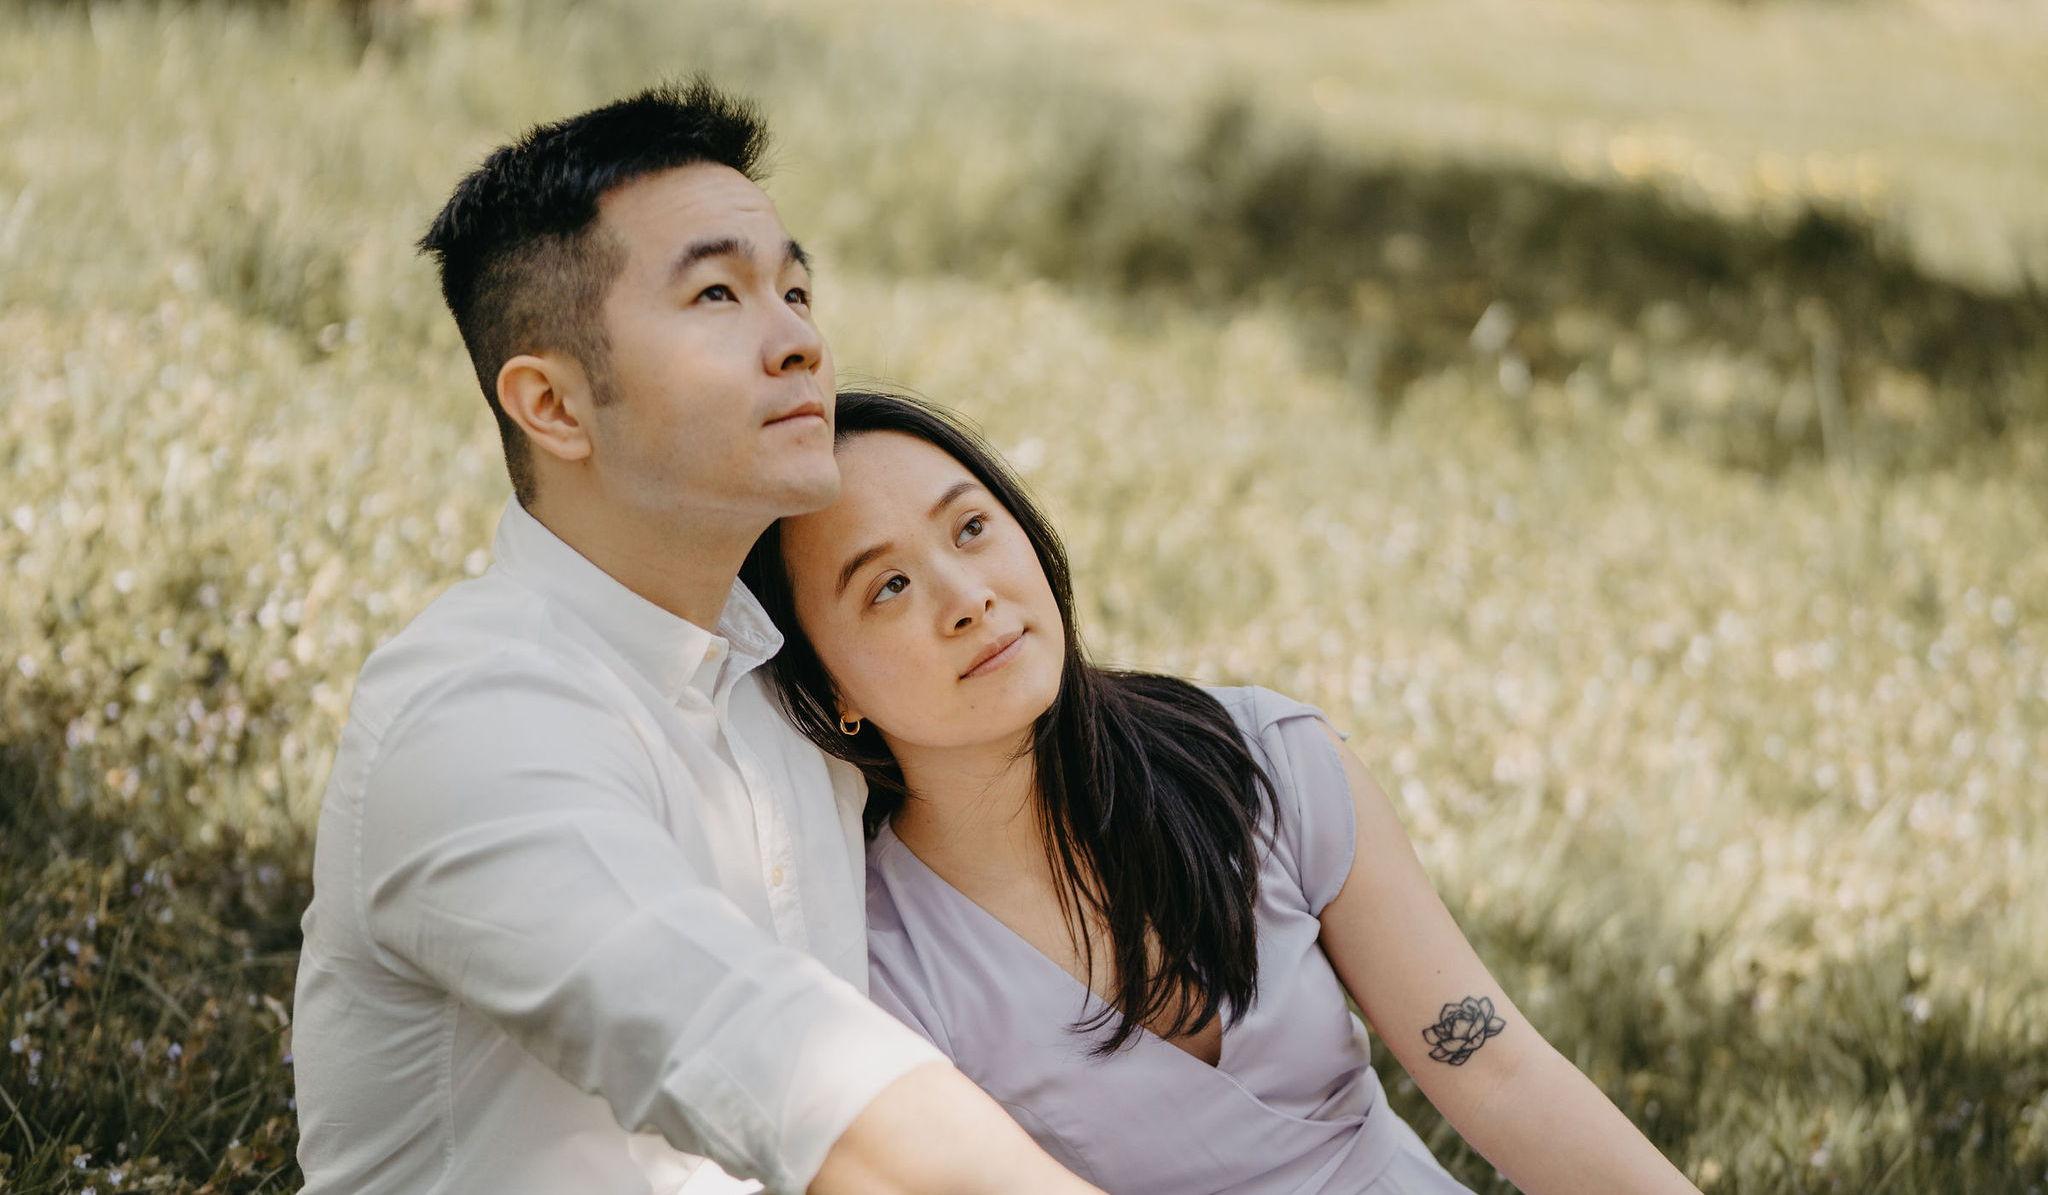 The Wedding Website of Stacy Li and Brian Kong